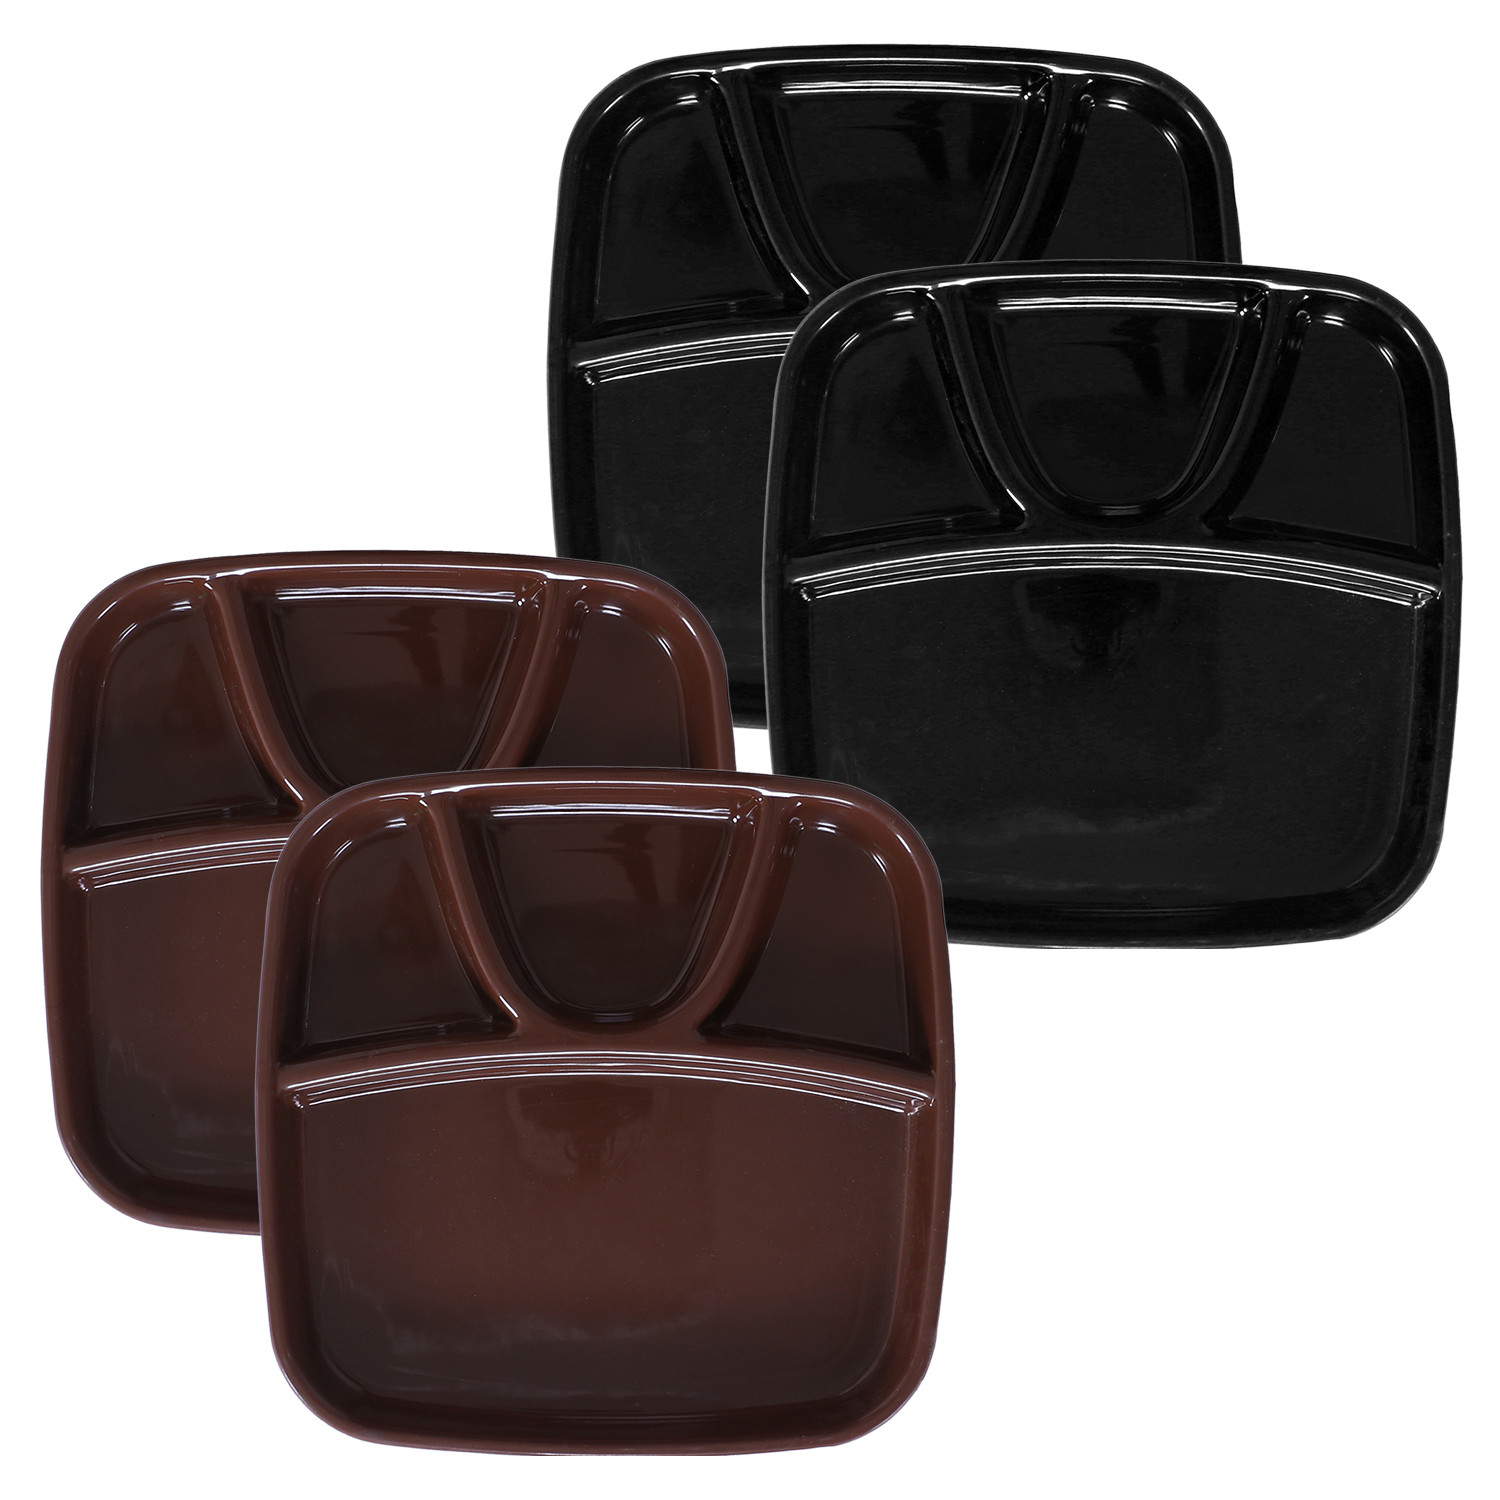 Kuber Industries Serving Plate|Plate Set For Dinner|Unbreakable Plastic Plates|Microwave Safe Plates|Food Organizer With 4 Partitions(Black & Brown)